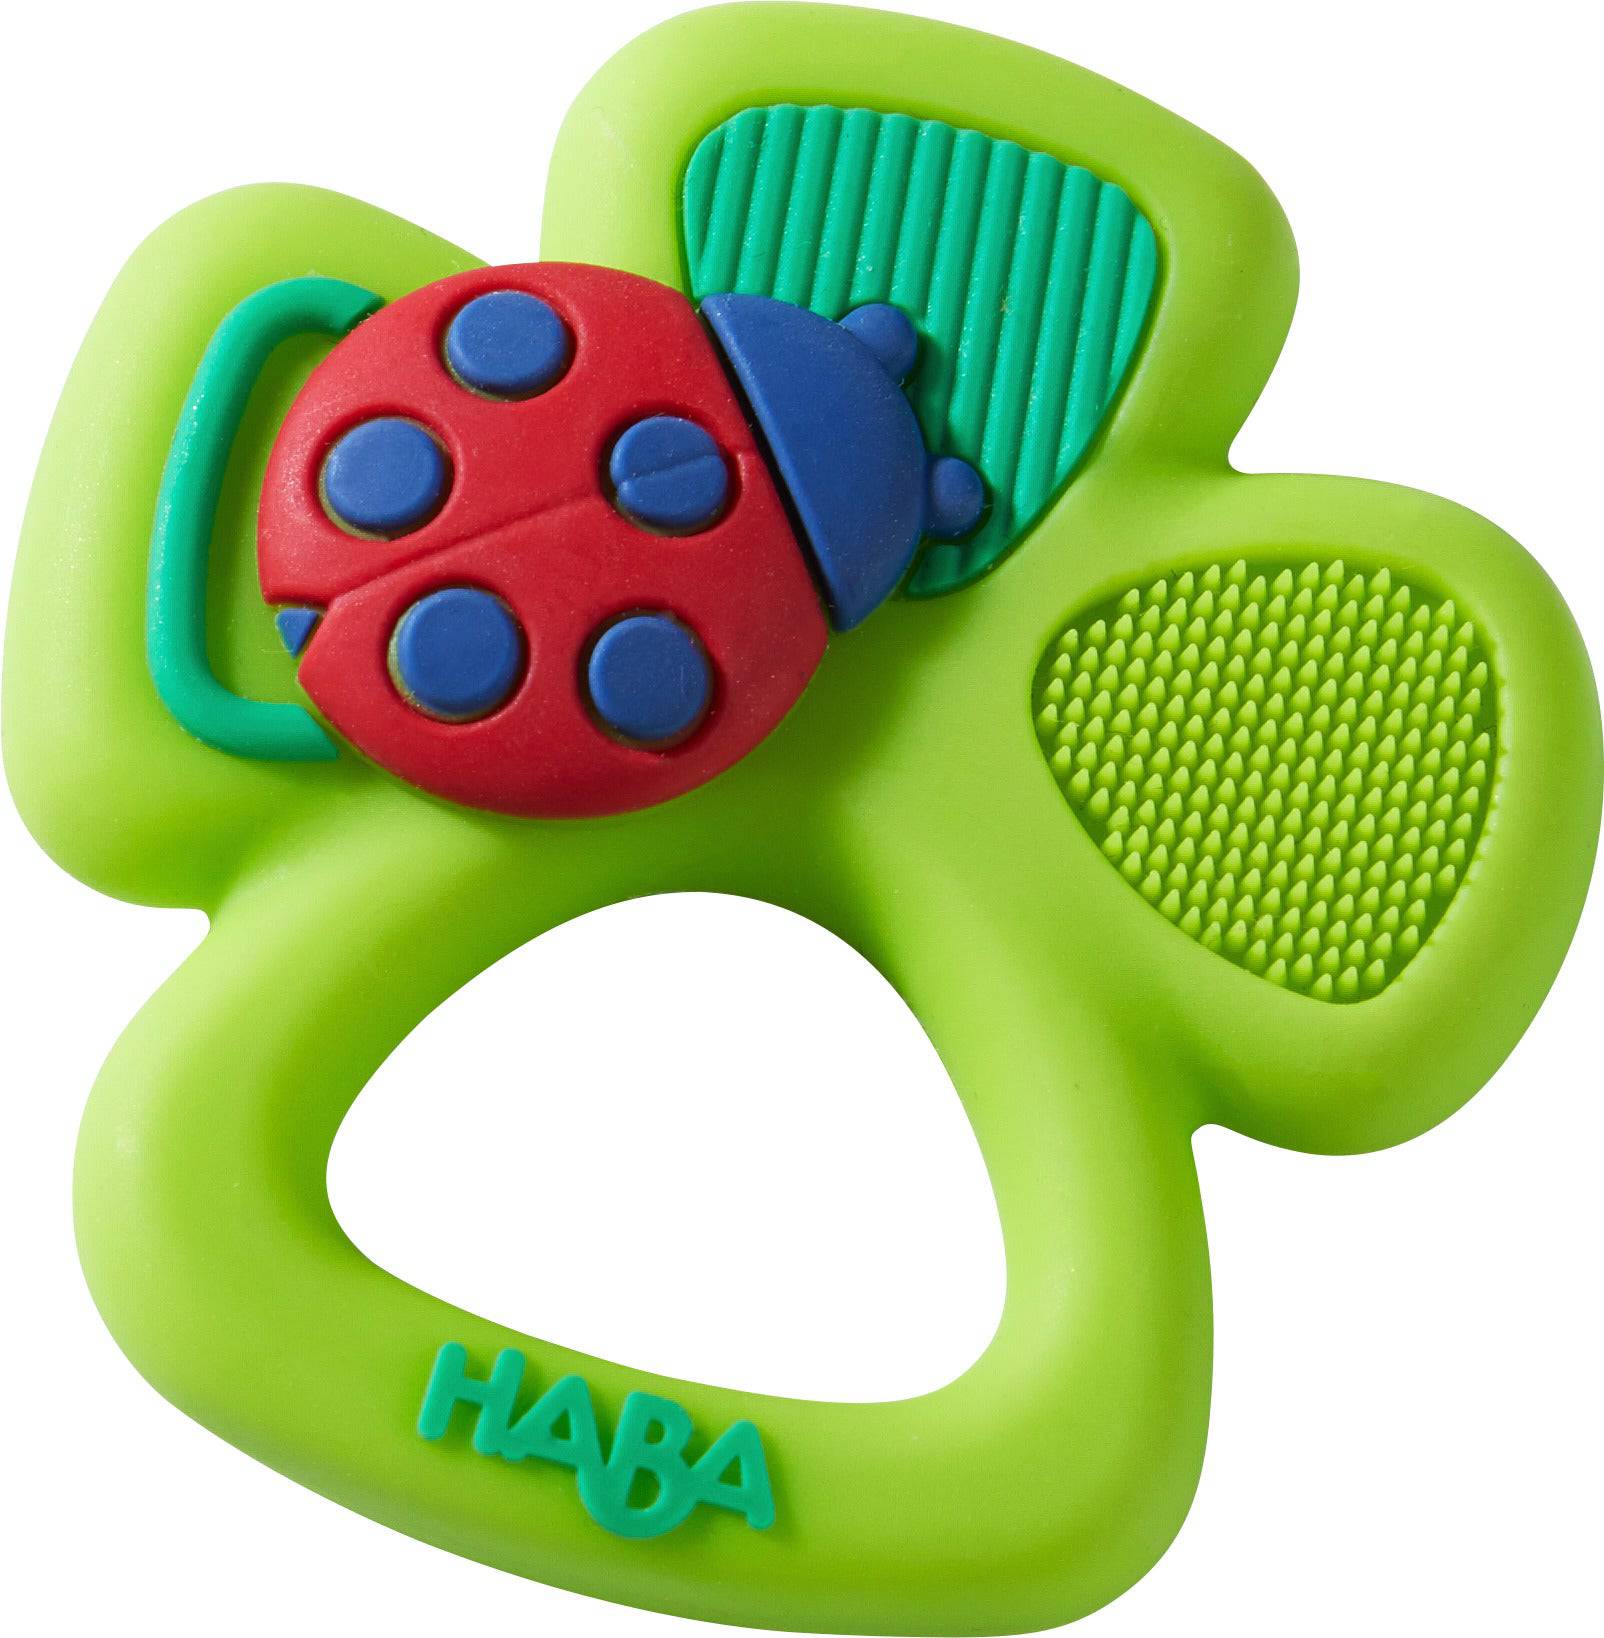 Shamrock Silicone Clutch Toy - A Child's Delight